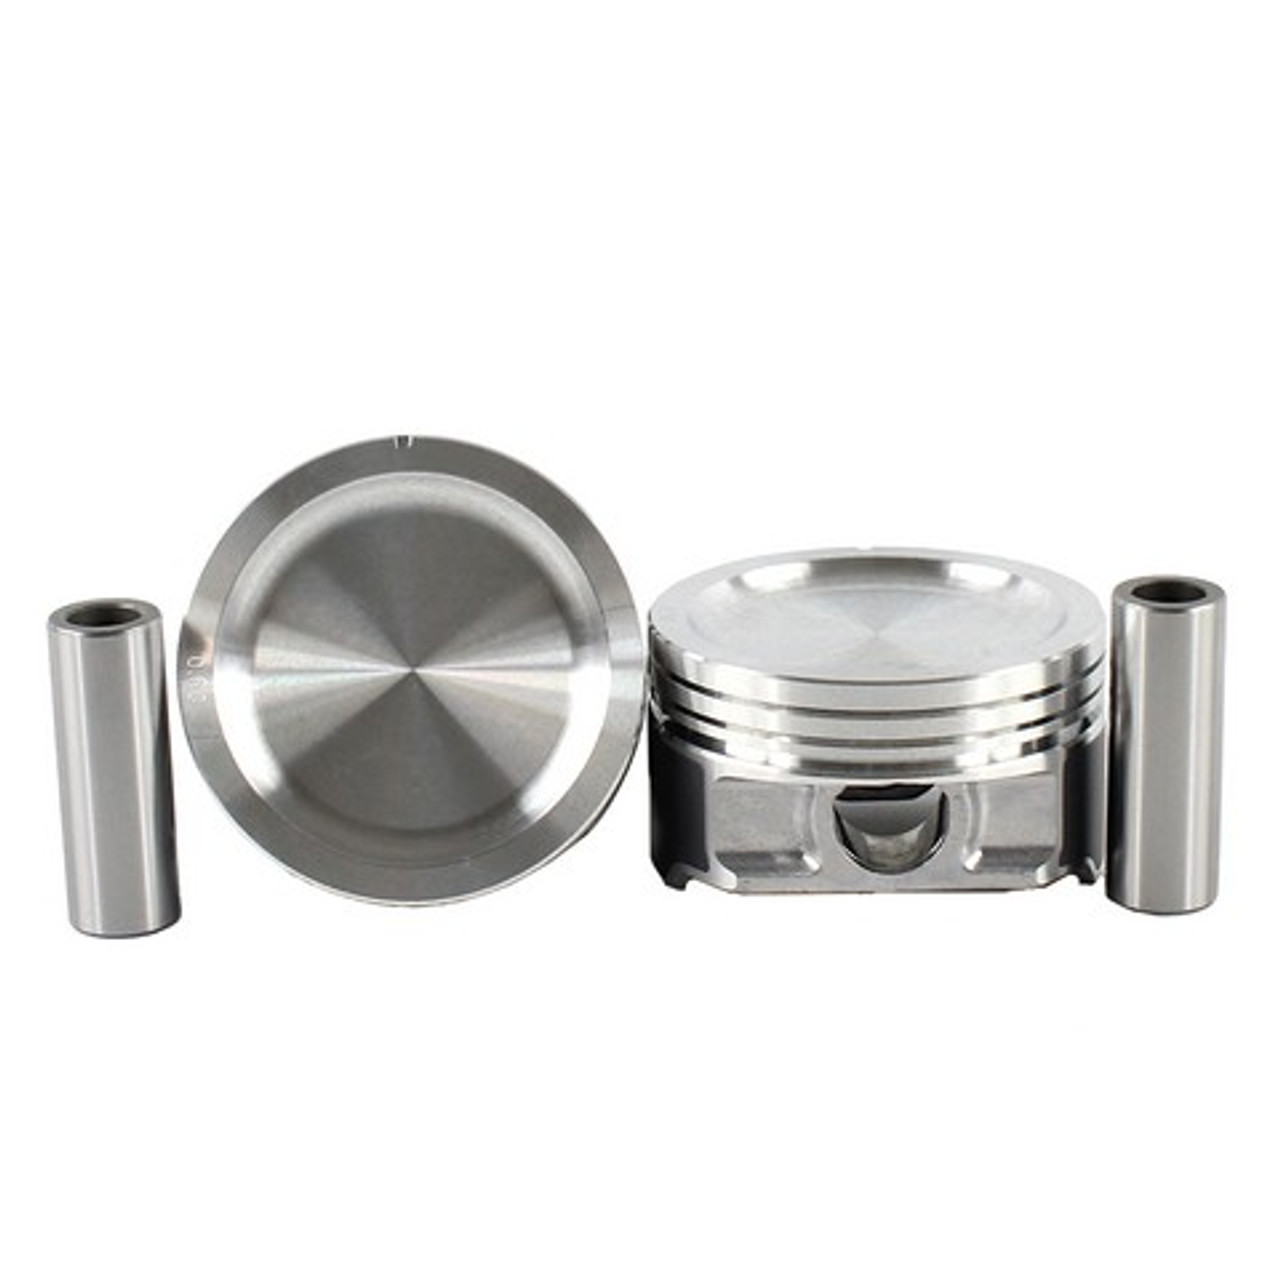 Piston Set 4.6L 2003 Ford Expedition - P4151.28